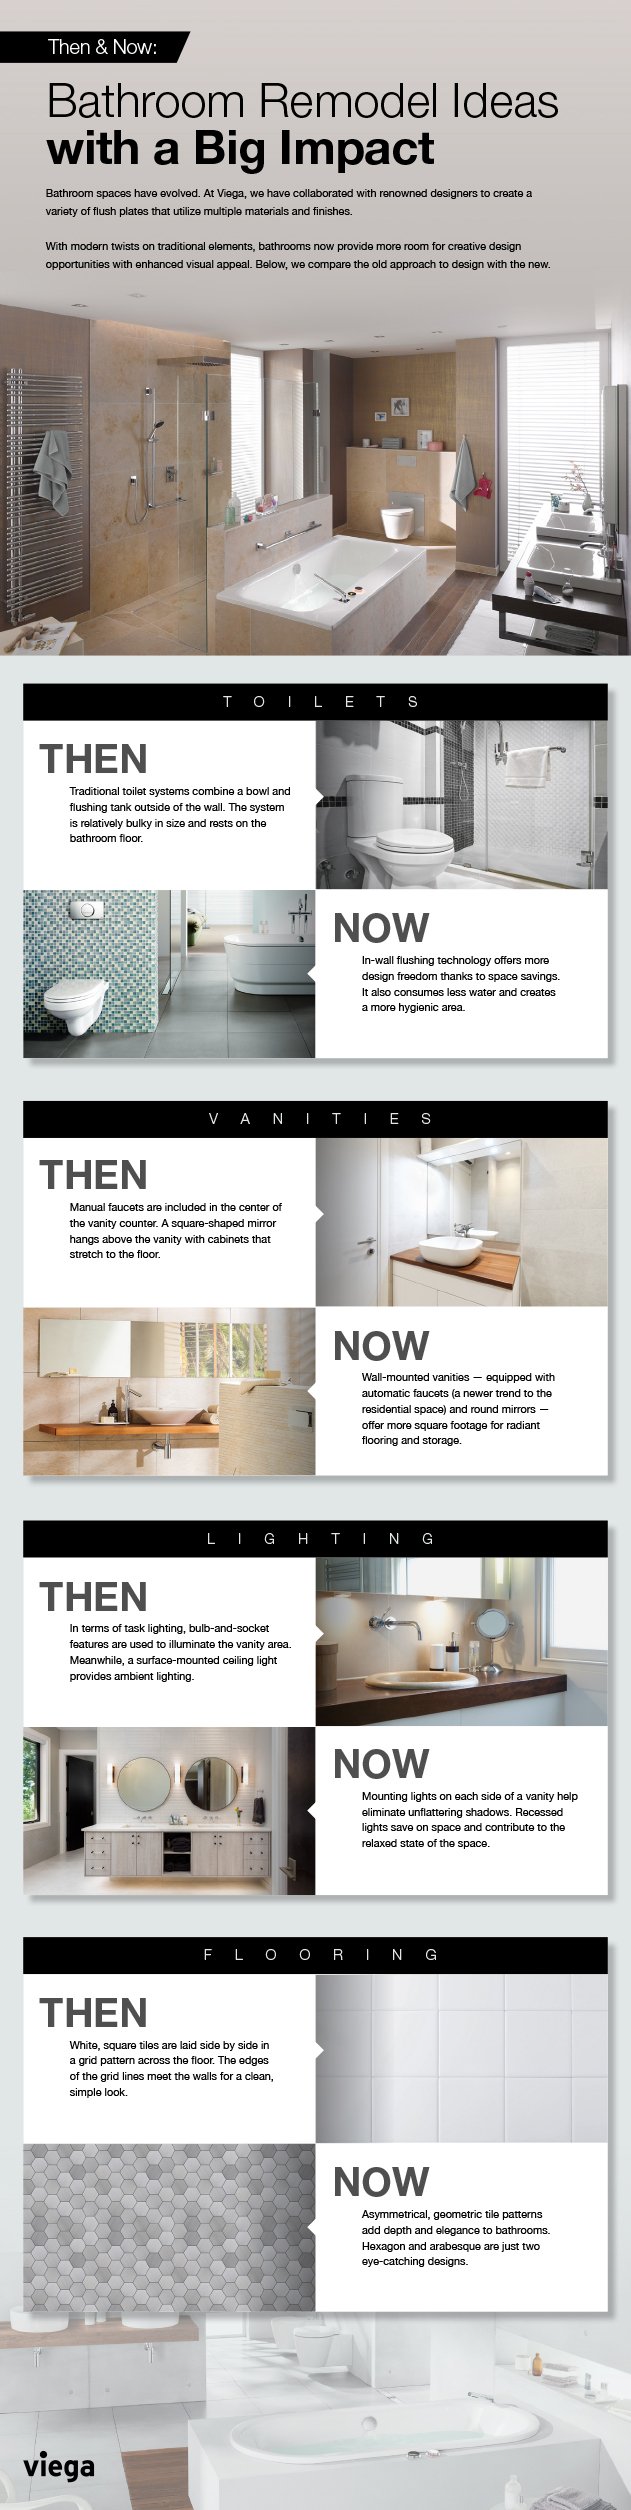 Then & Now: Bathroom Remodel Ideas with a Big Impact